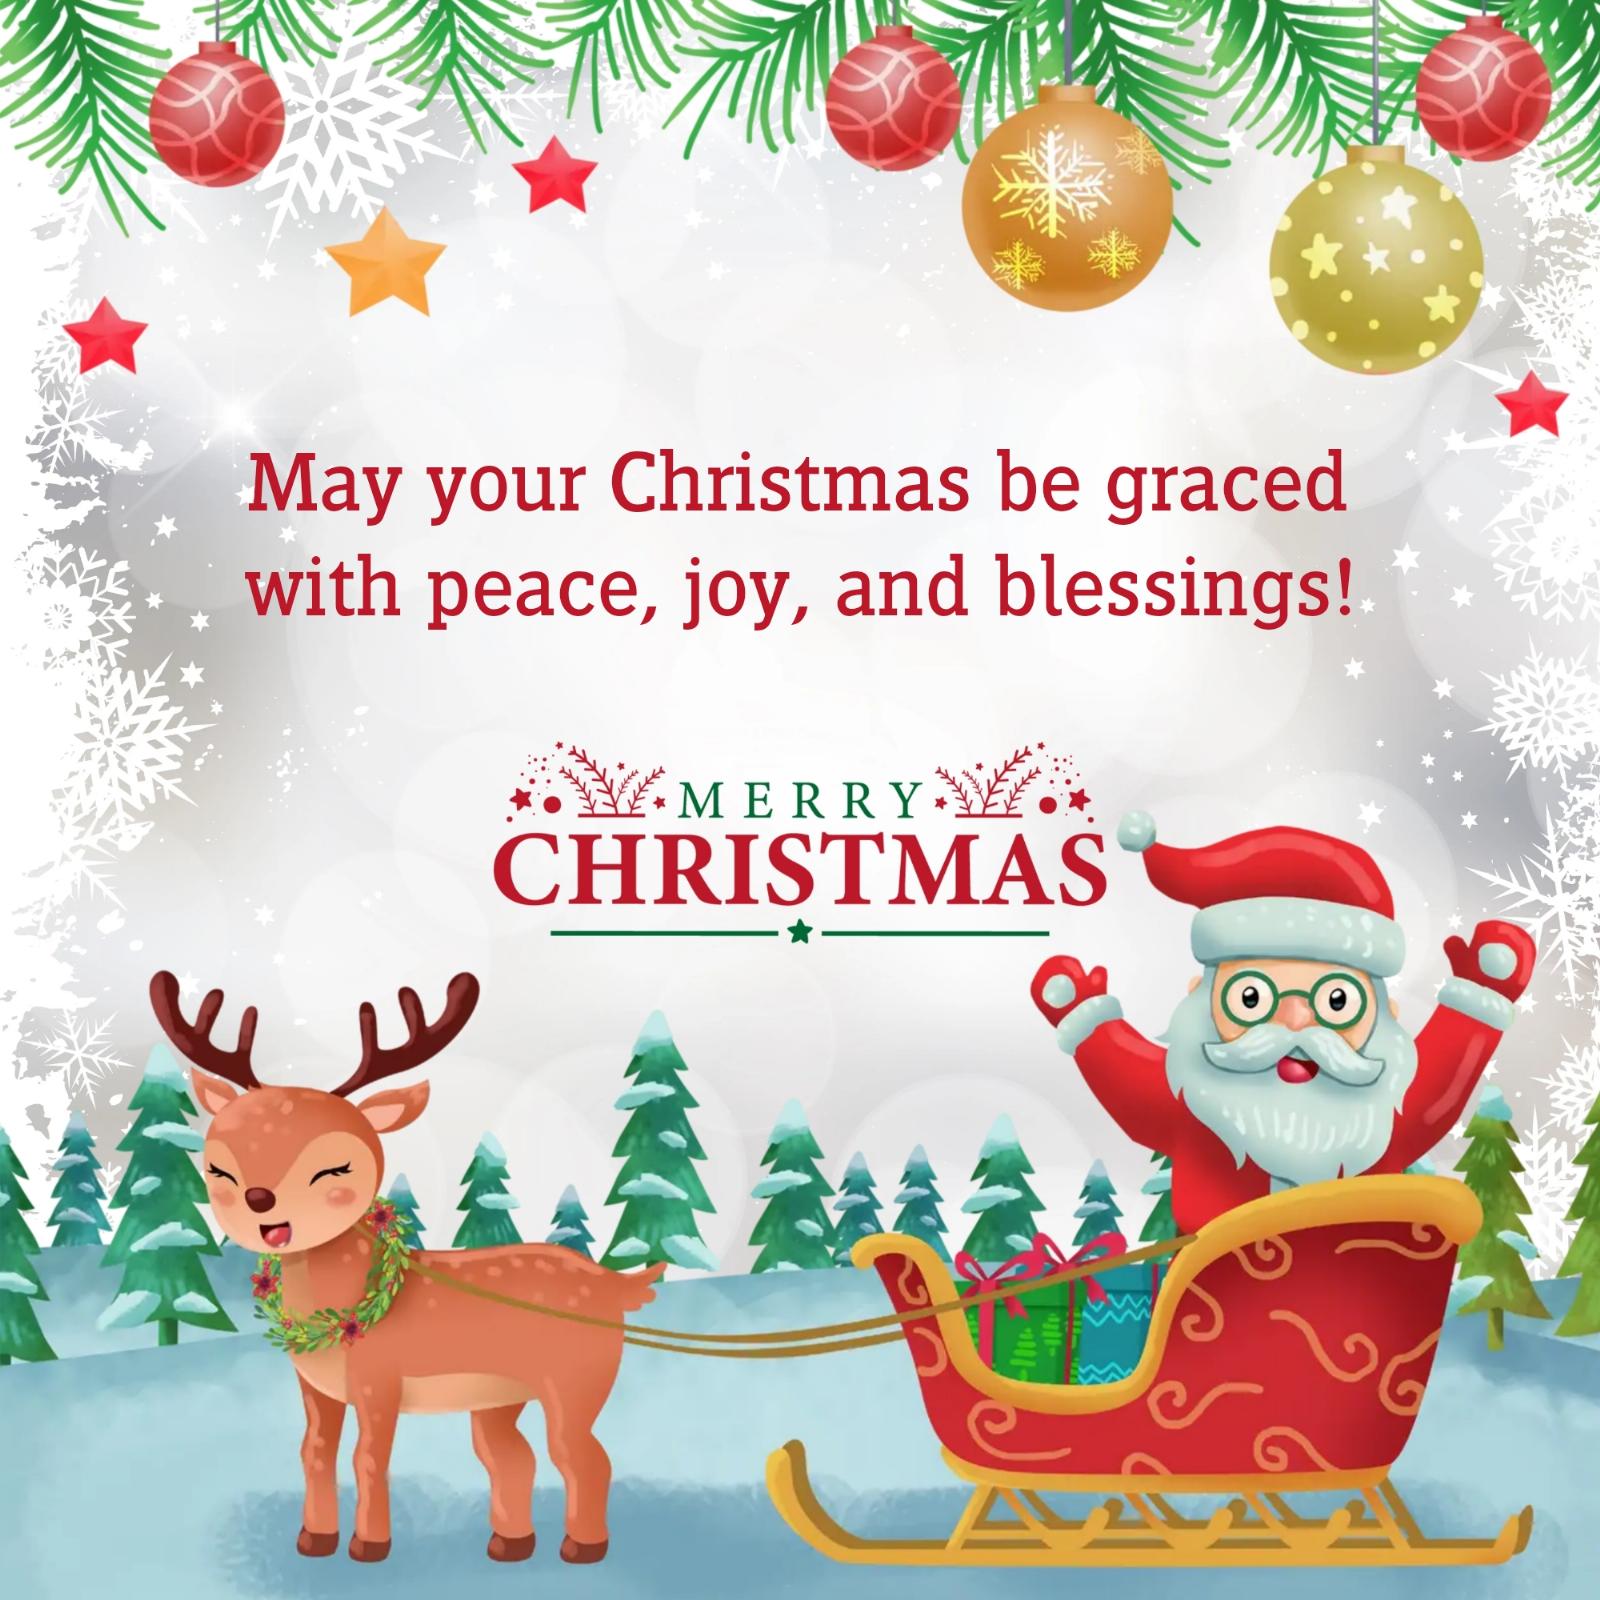 May your Christmas be graced with peace joy and blessings